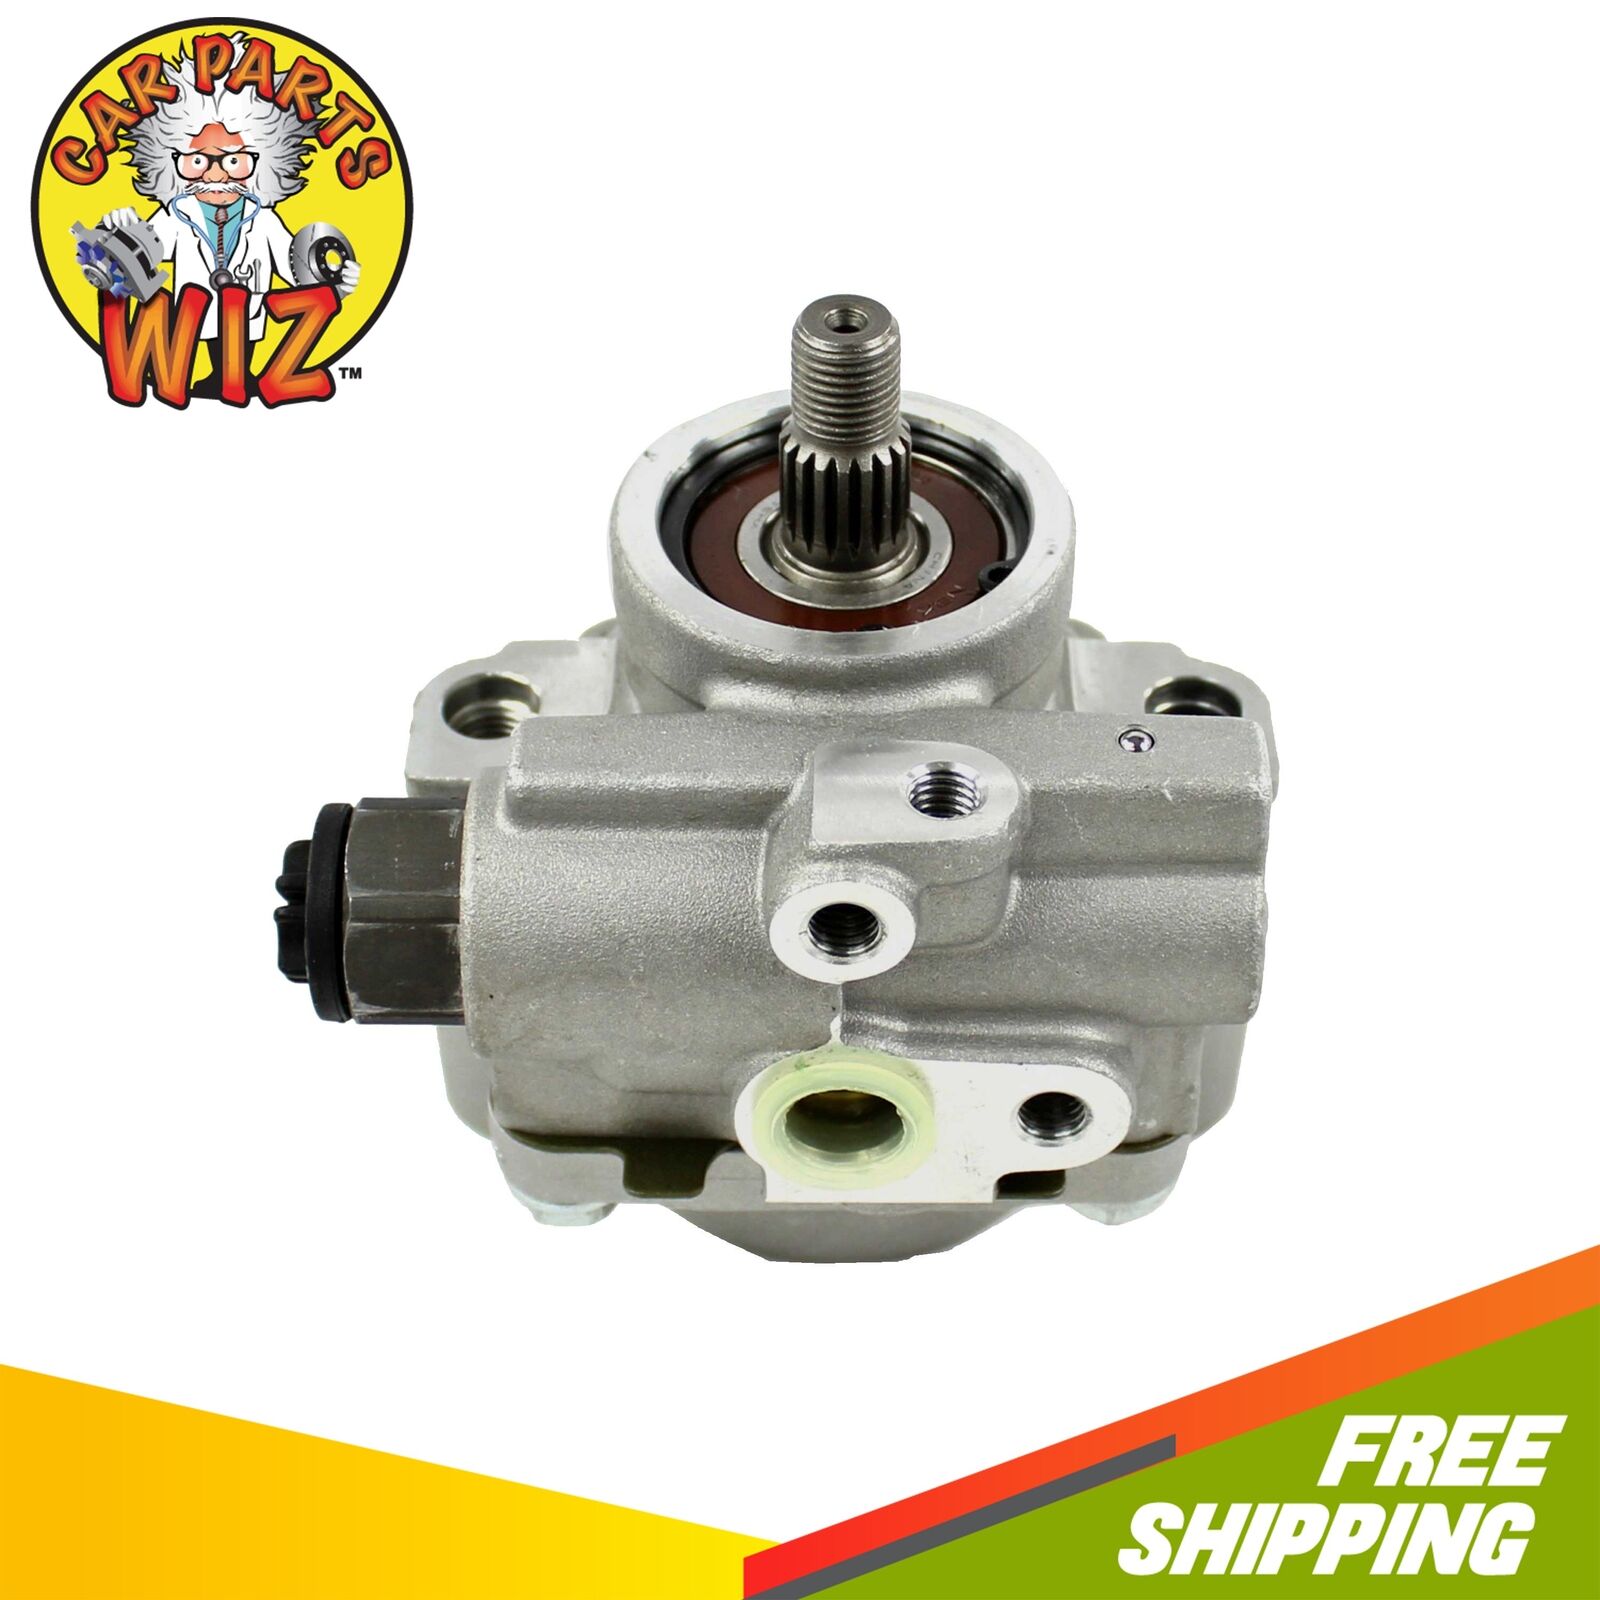 New Power Steering Pump Fits 98-00 Chevrolet Toyota 1.8L DOHC